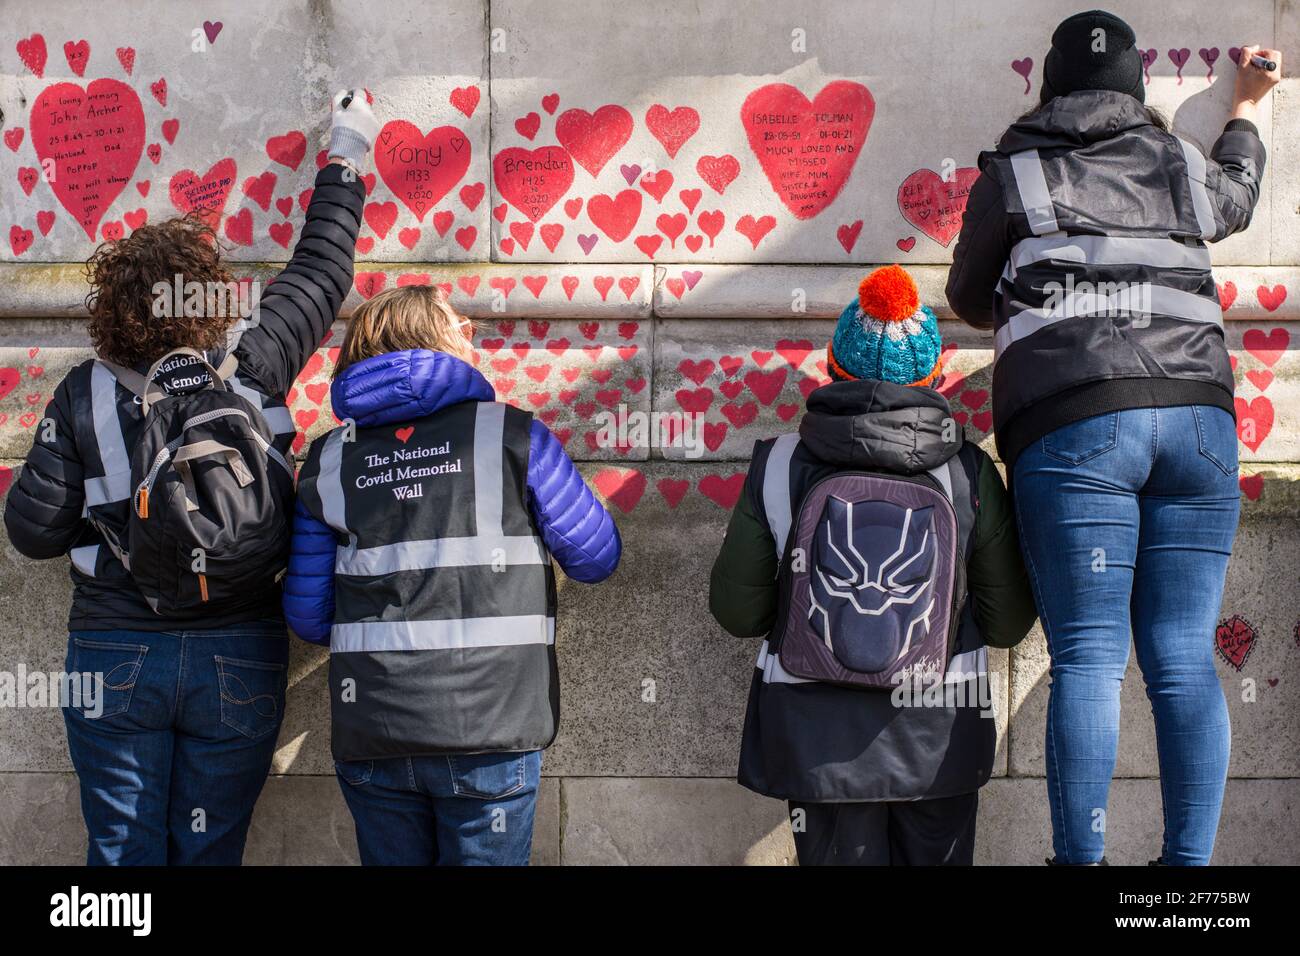 Volunteers paint red hearts on the National Covid Memorial Wall in London. The National Covid Memorial Wall in London outside St Thomas' Hospital is being hand-painted with 150000 hearts to honor UK Covid-19 victims. (Photo by Pietro Recchia / SOPA Images/Sipa USA) Stock Photo